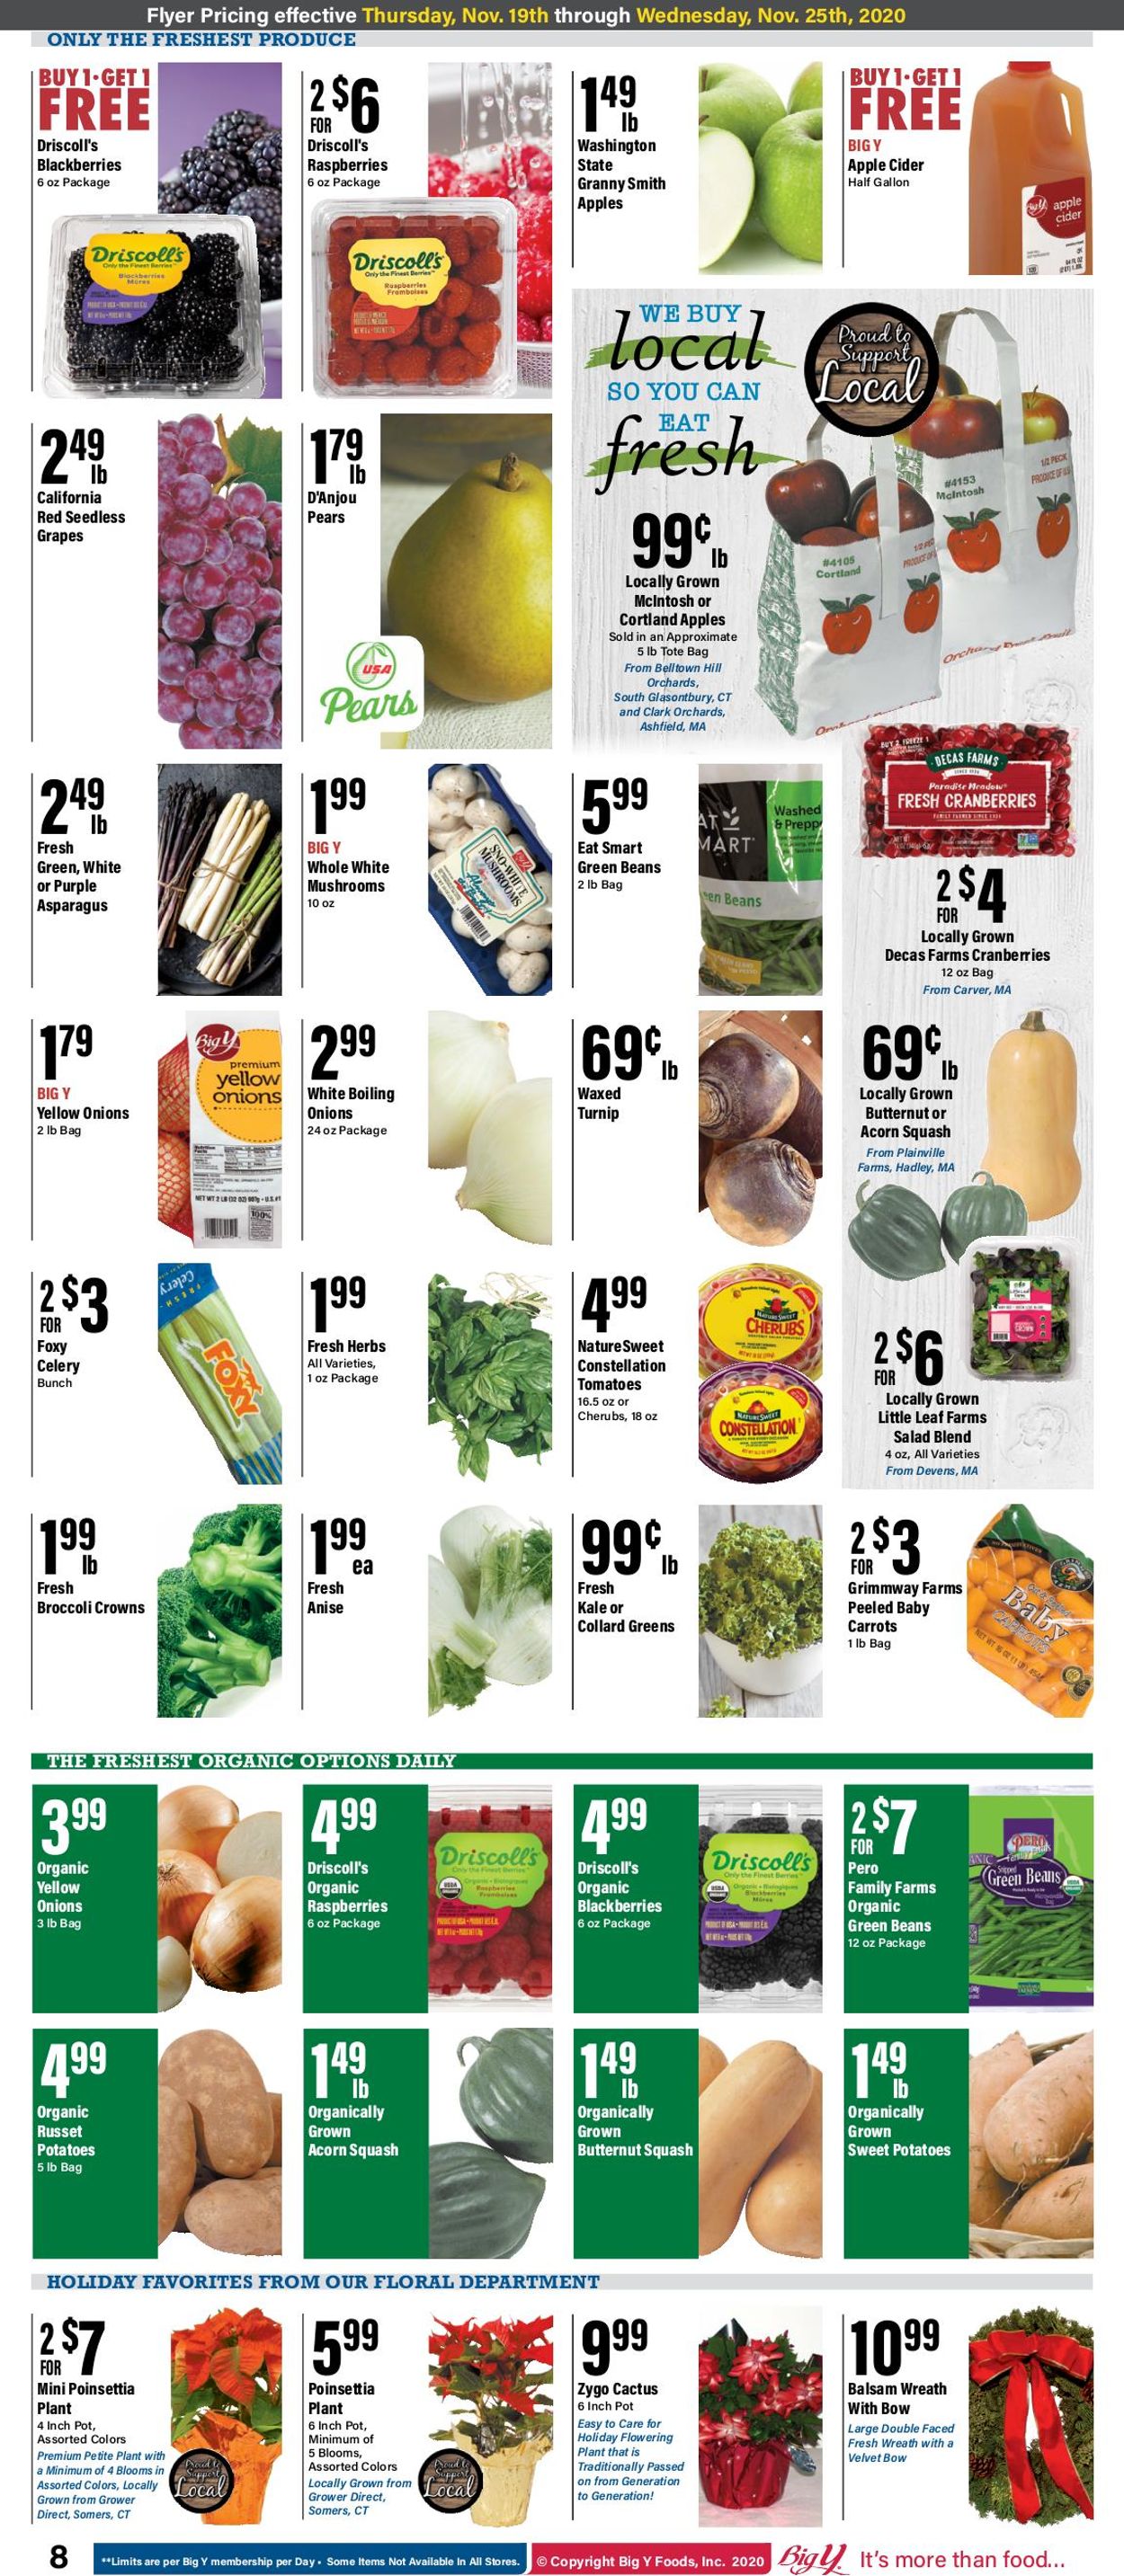 Catalogue Big Y - Thanksgiving Ad 2020 from 11/19/2020